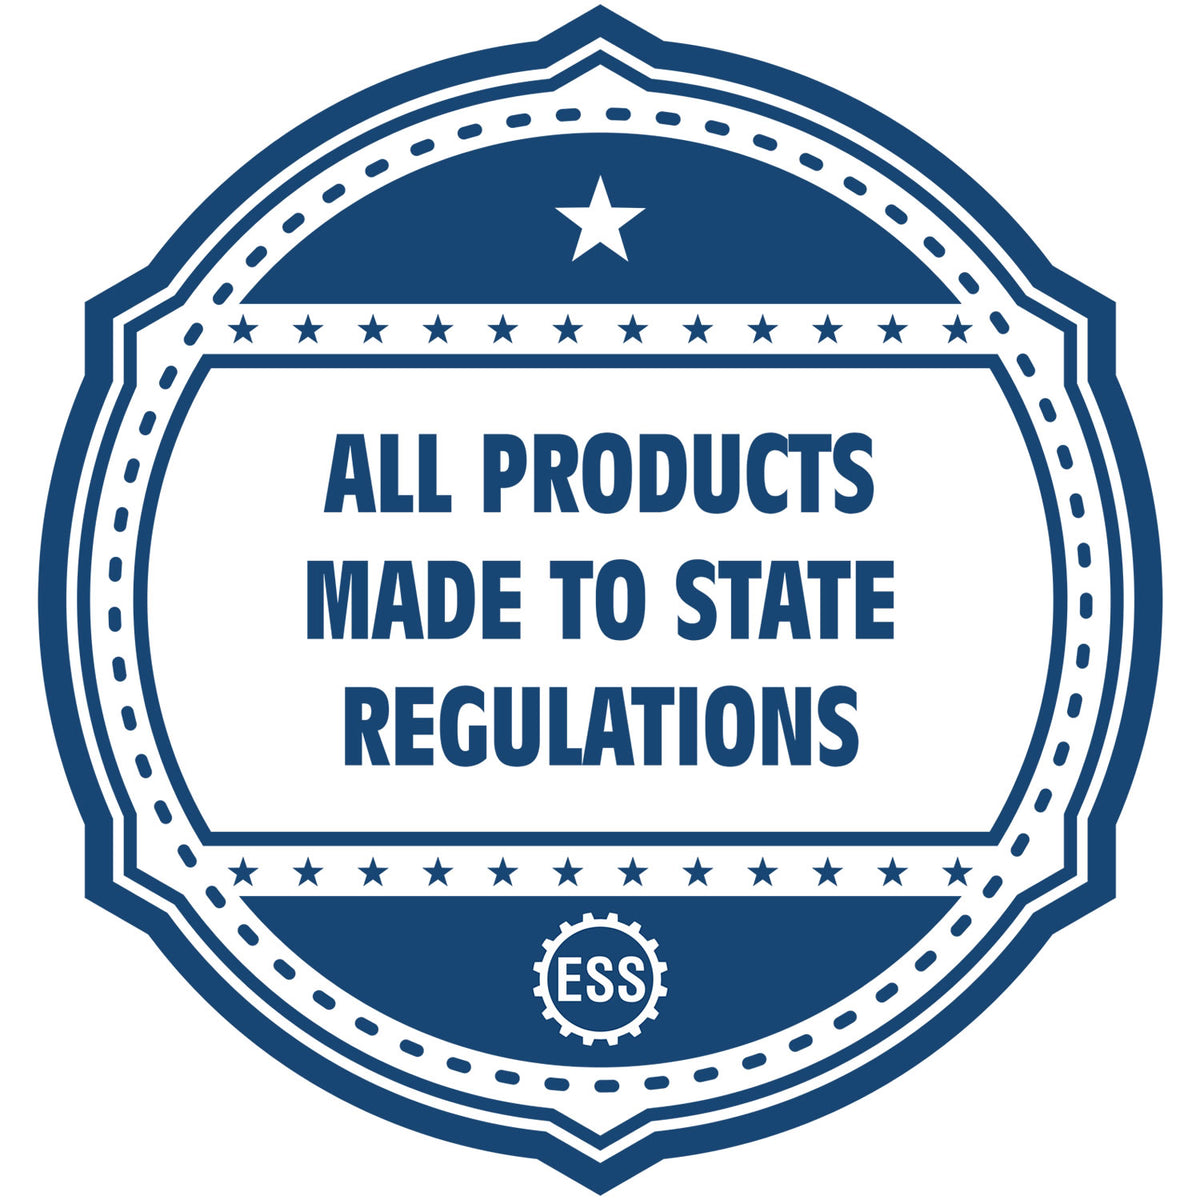 An icon or badge element for the PSI Mississippi Notary Stamp showing that this product is made in compliance with state regulations.